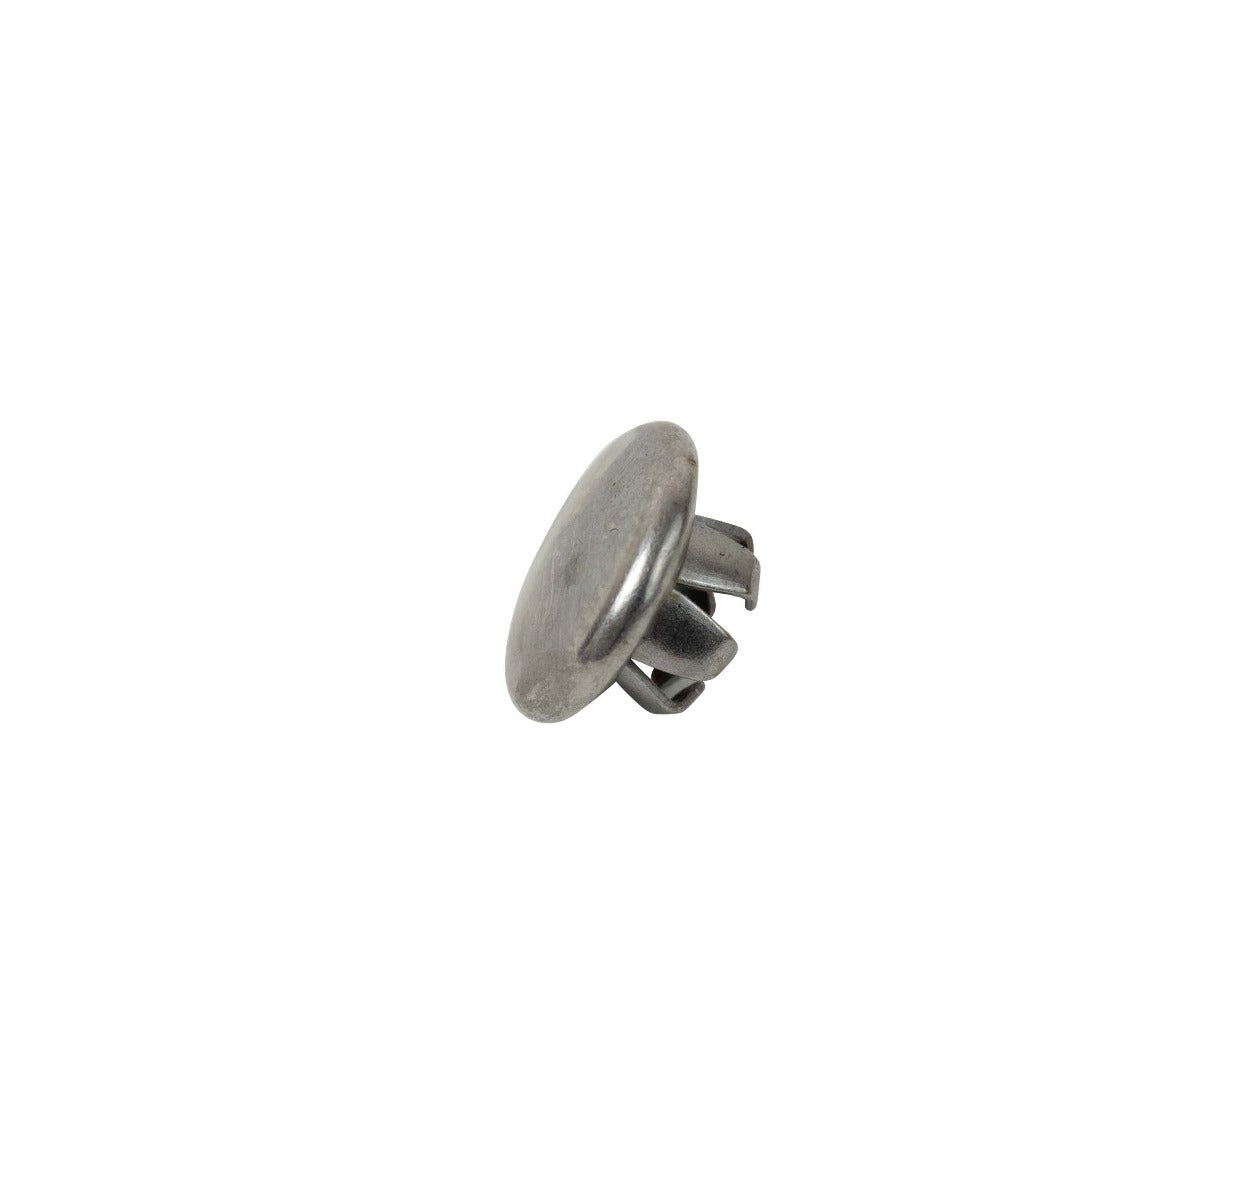 Stainless Steel Plug For 3/16" Hole